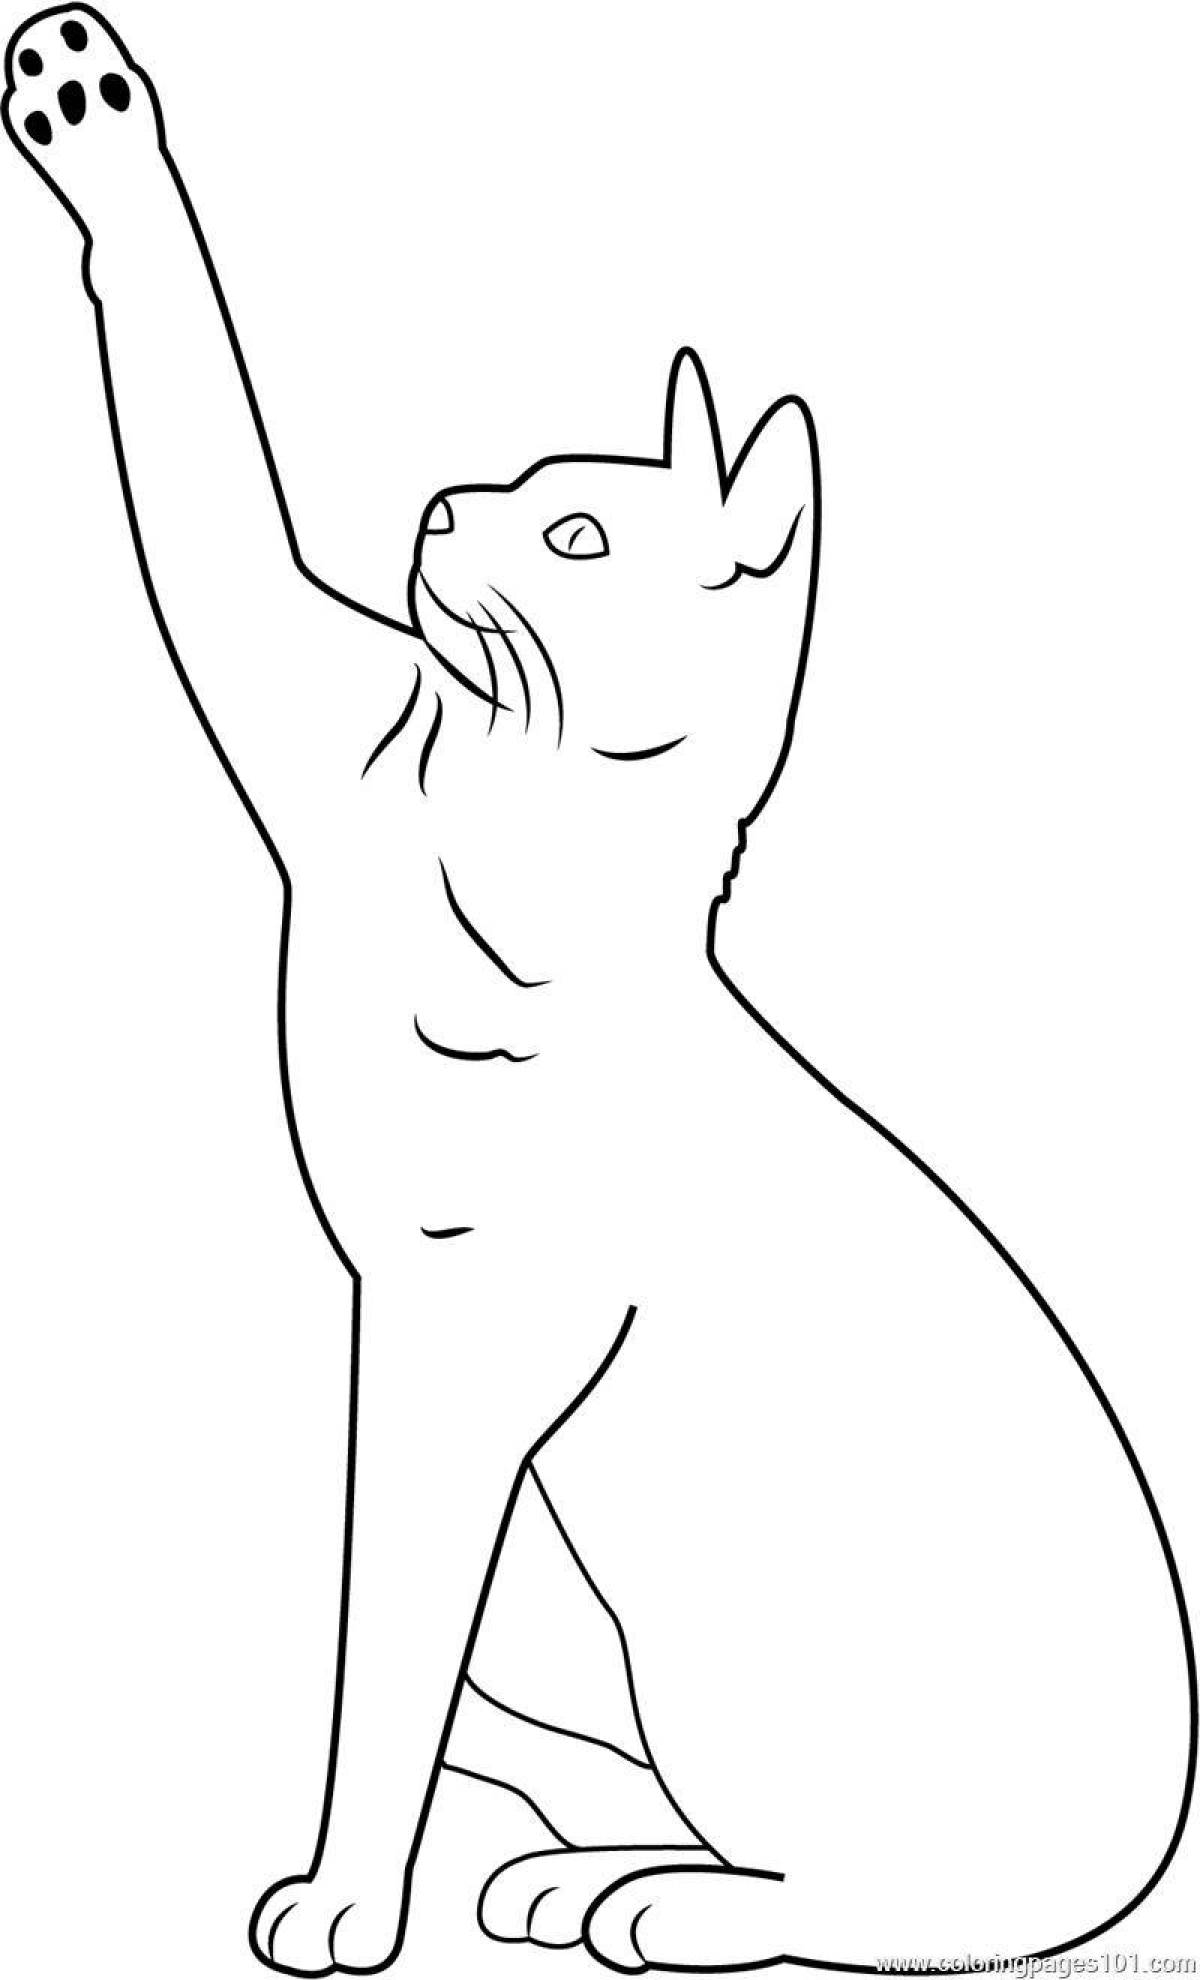 Animated sitting cat coloring page